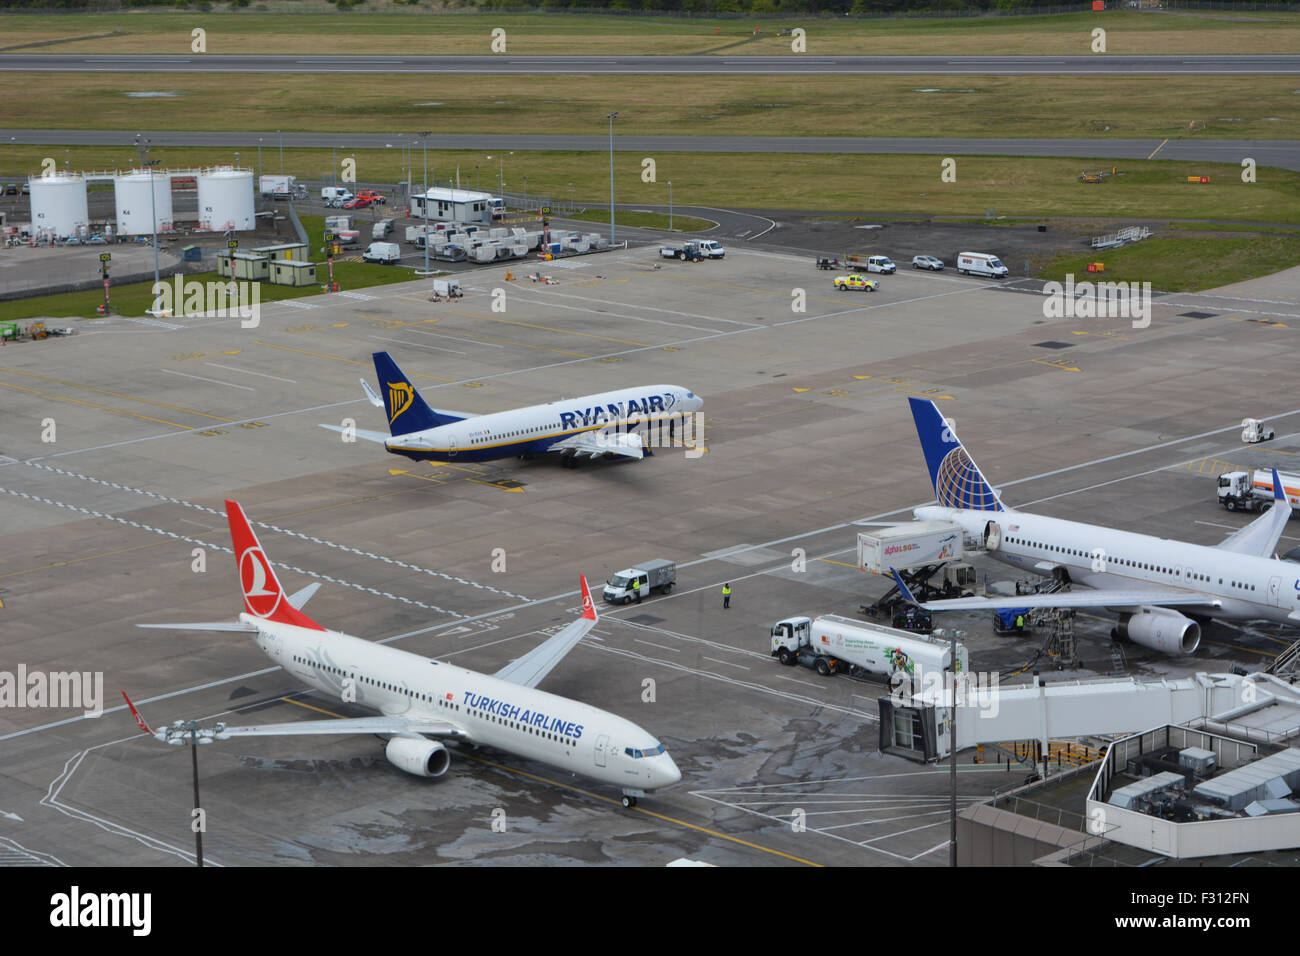 A Ryanir B737-800, A Turkish Airlines B737-800 and a United Airlines B757-200 at the gate at Edinburgh Airport during 2015. Stock Photo